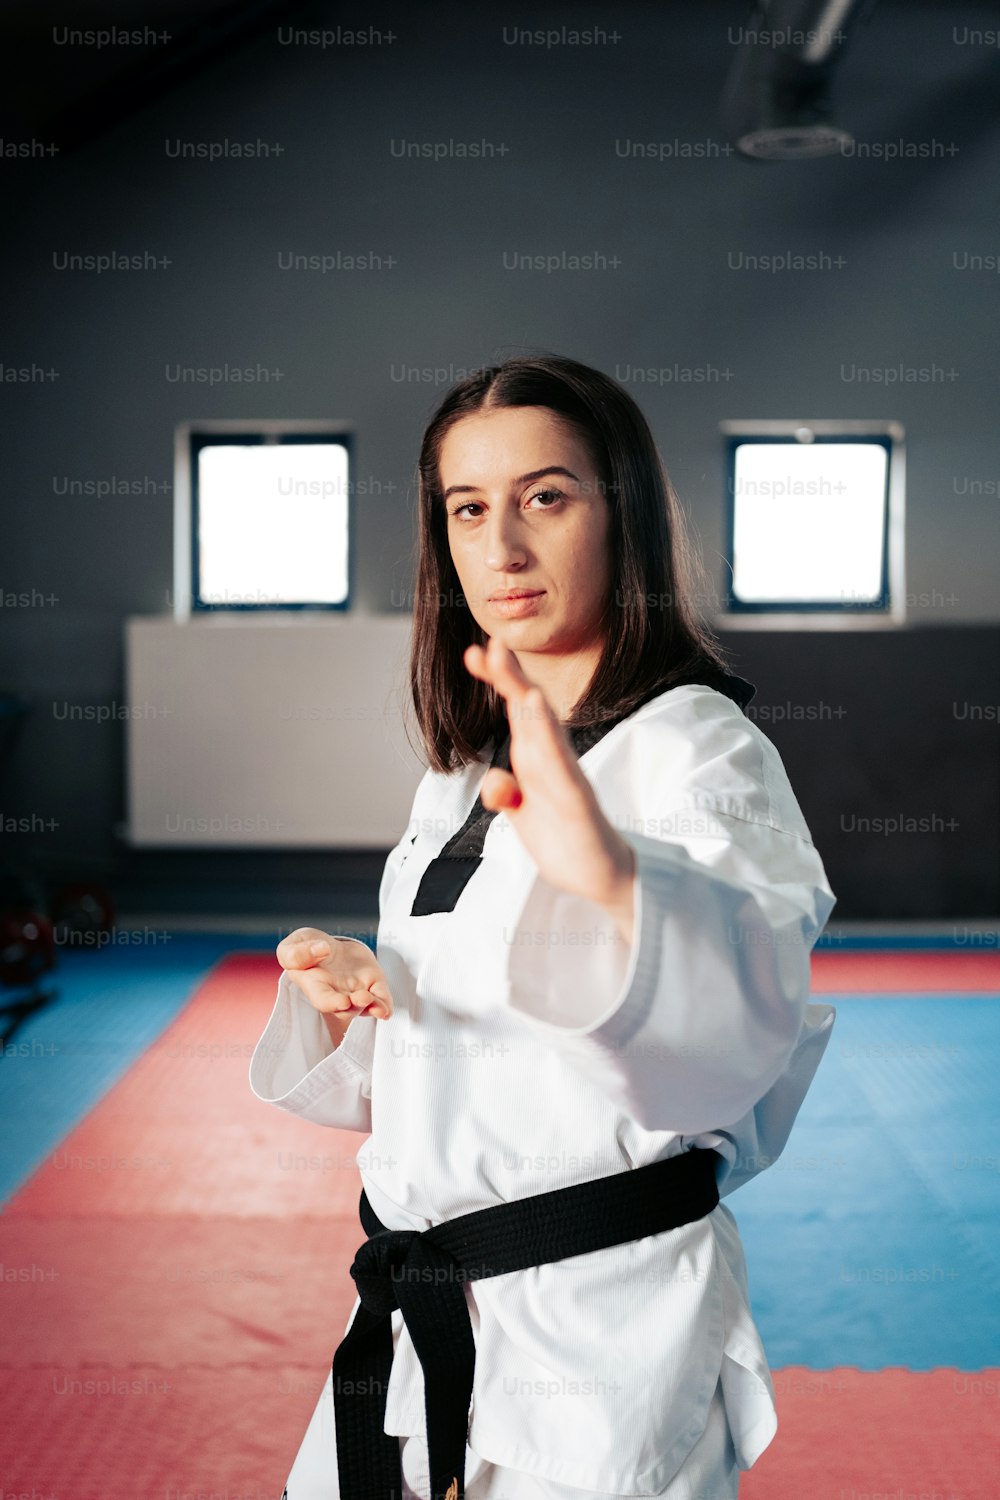 a woman standing in a room with a black belt